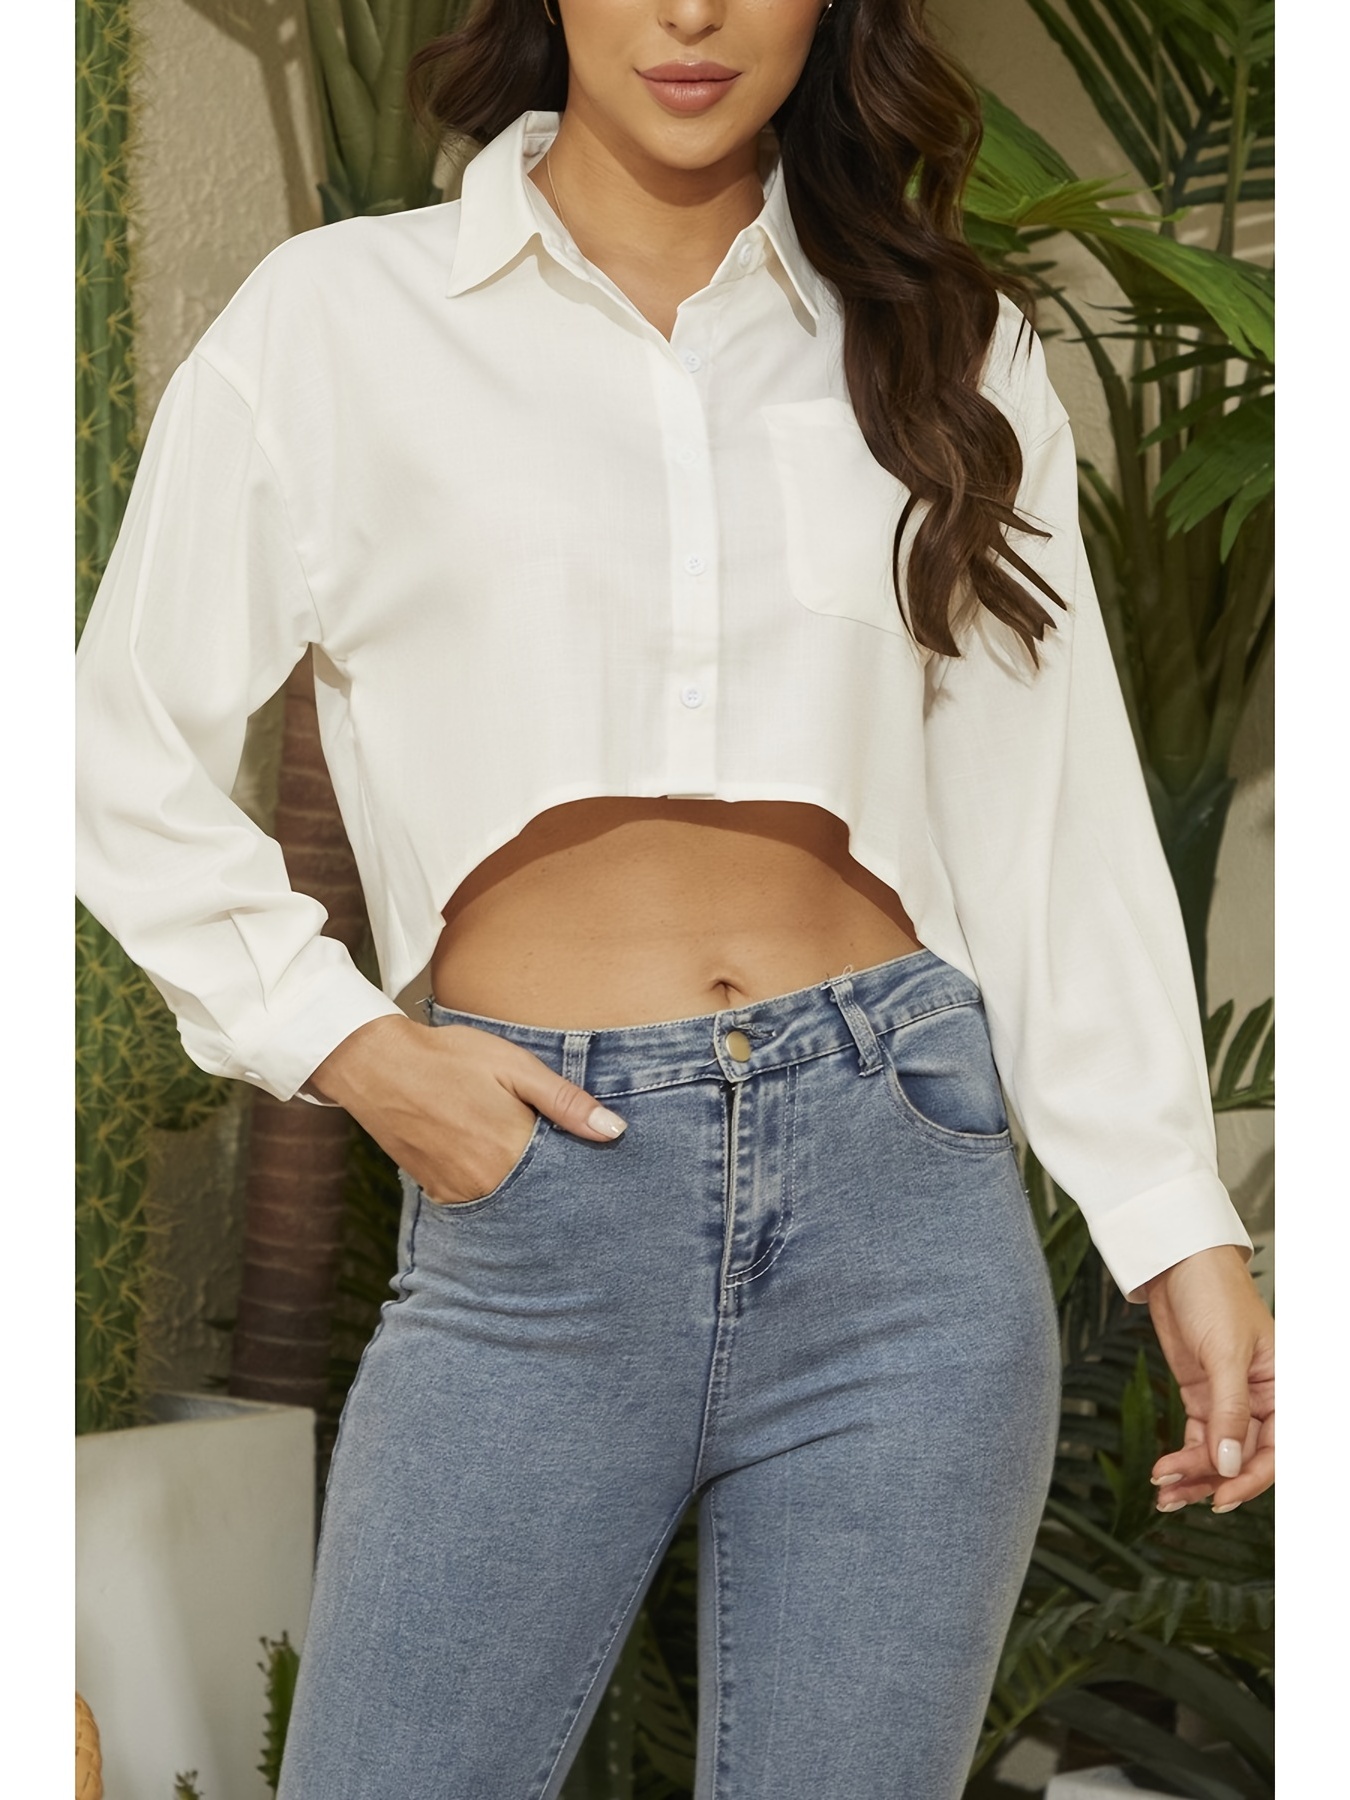 Long Sleeve Fall Crop Tops for Womens Trendy Clothes Going Out